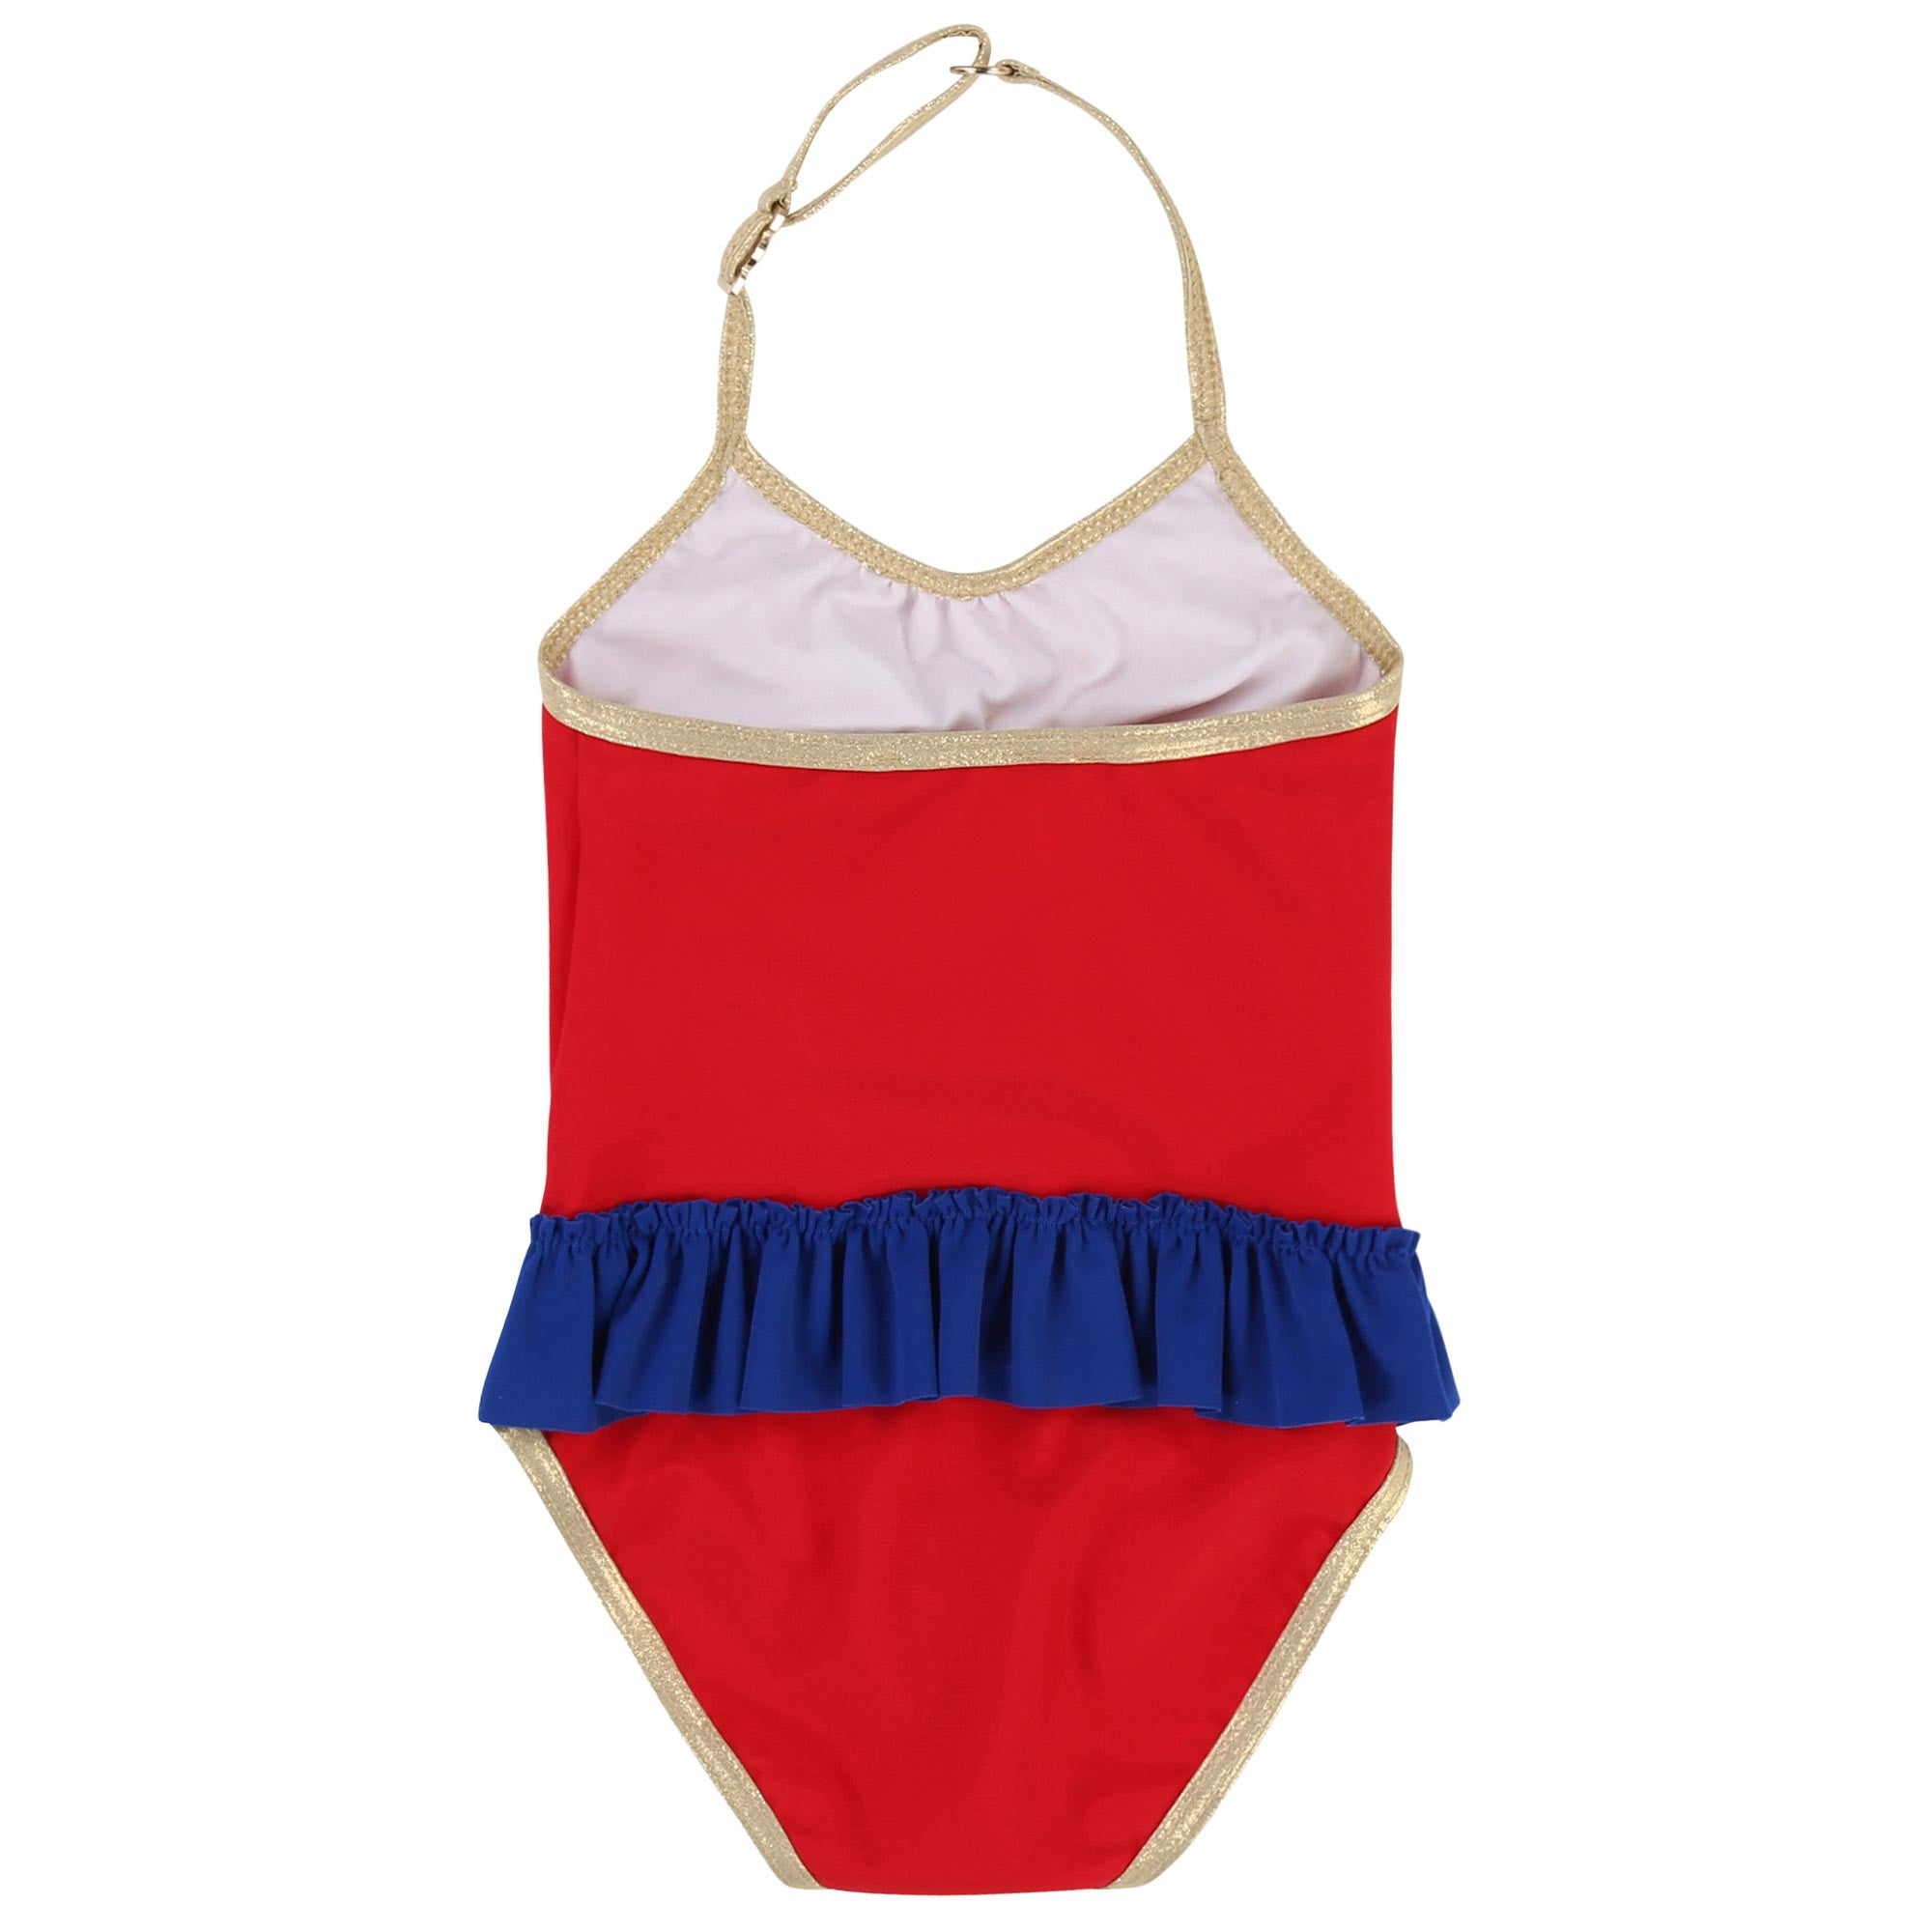 Baby Girls Red Swimsuit - CÉMAROSE | Children's Fashion Store - 2